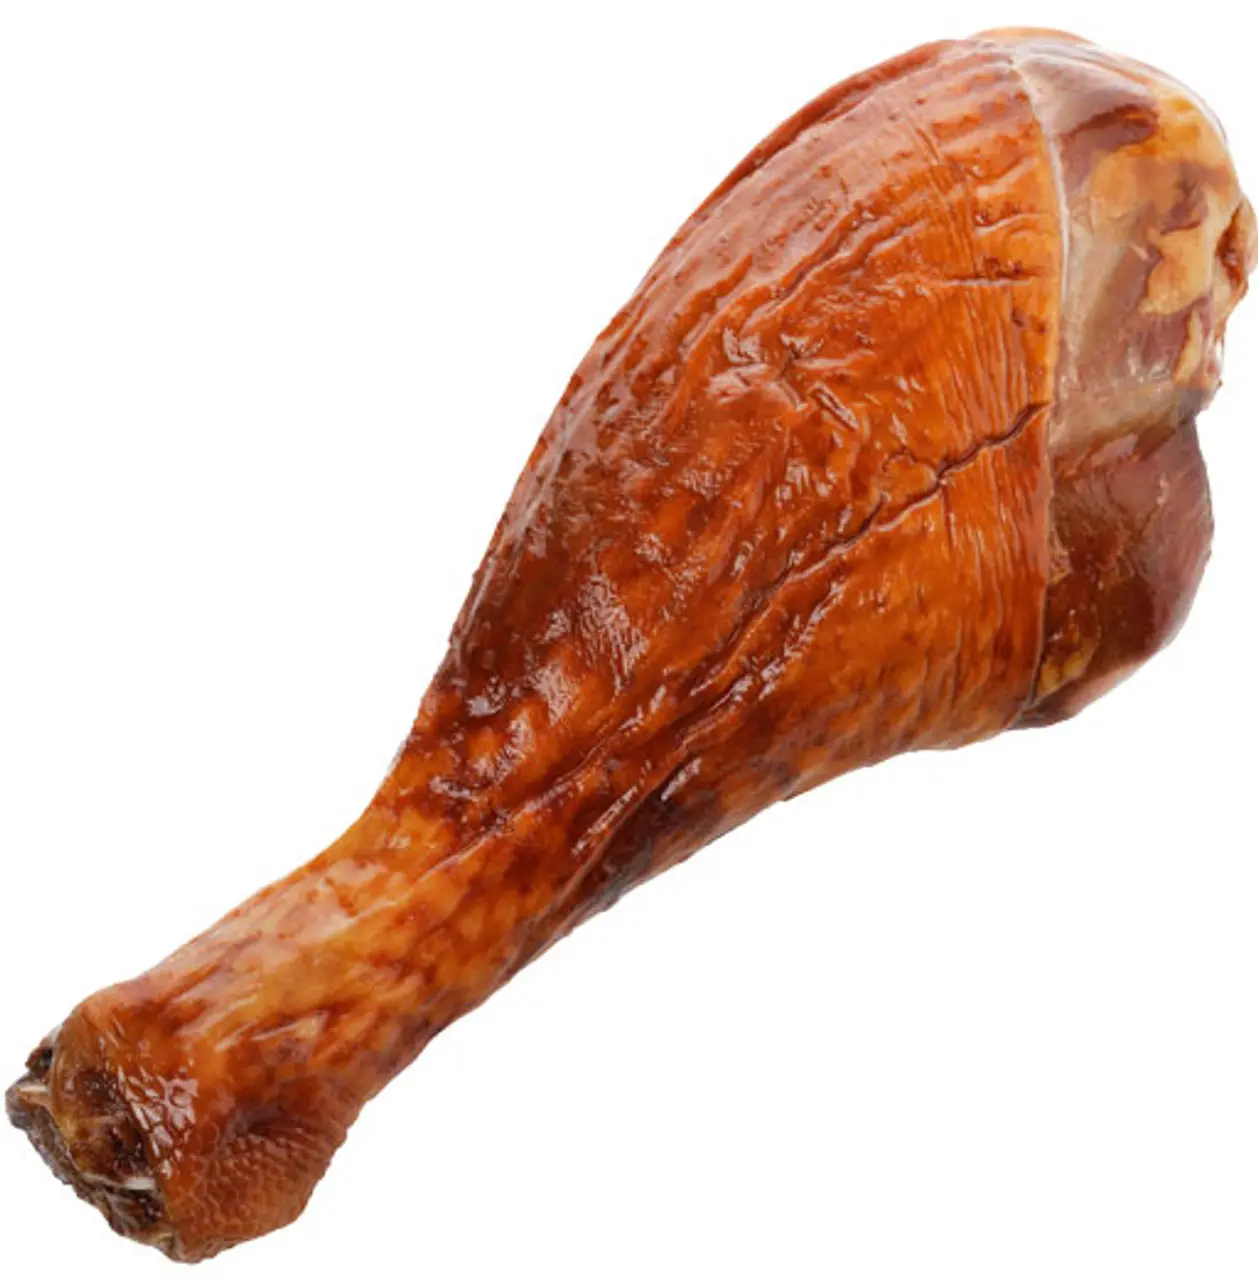 smoked turkey legs order online - How many turkey legs are in a 30 pound case